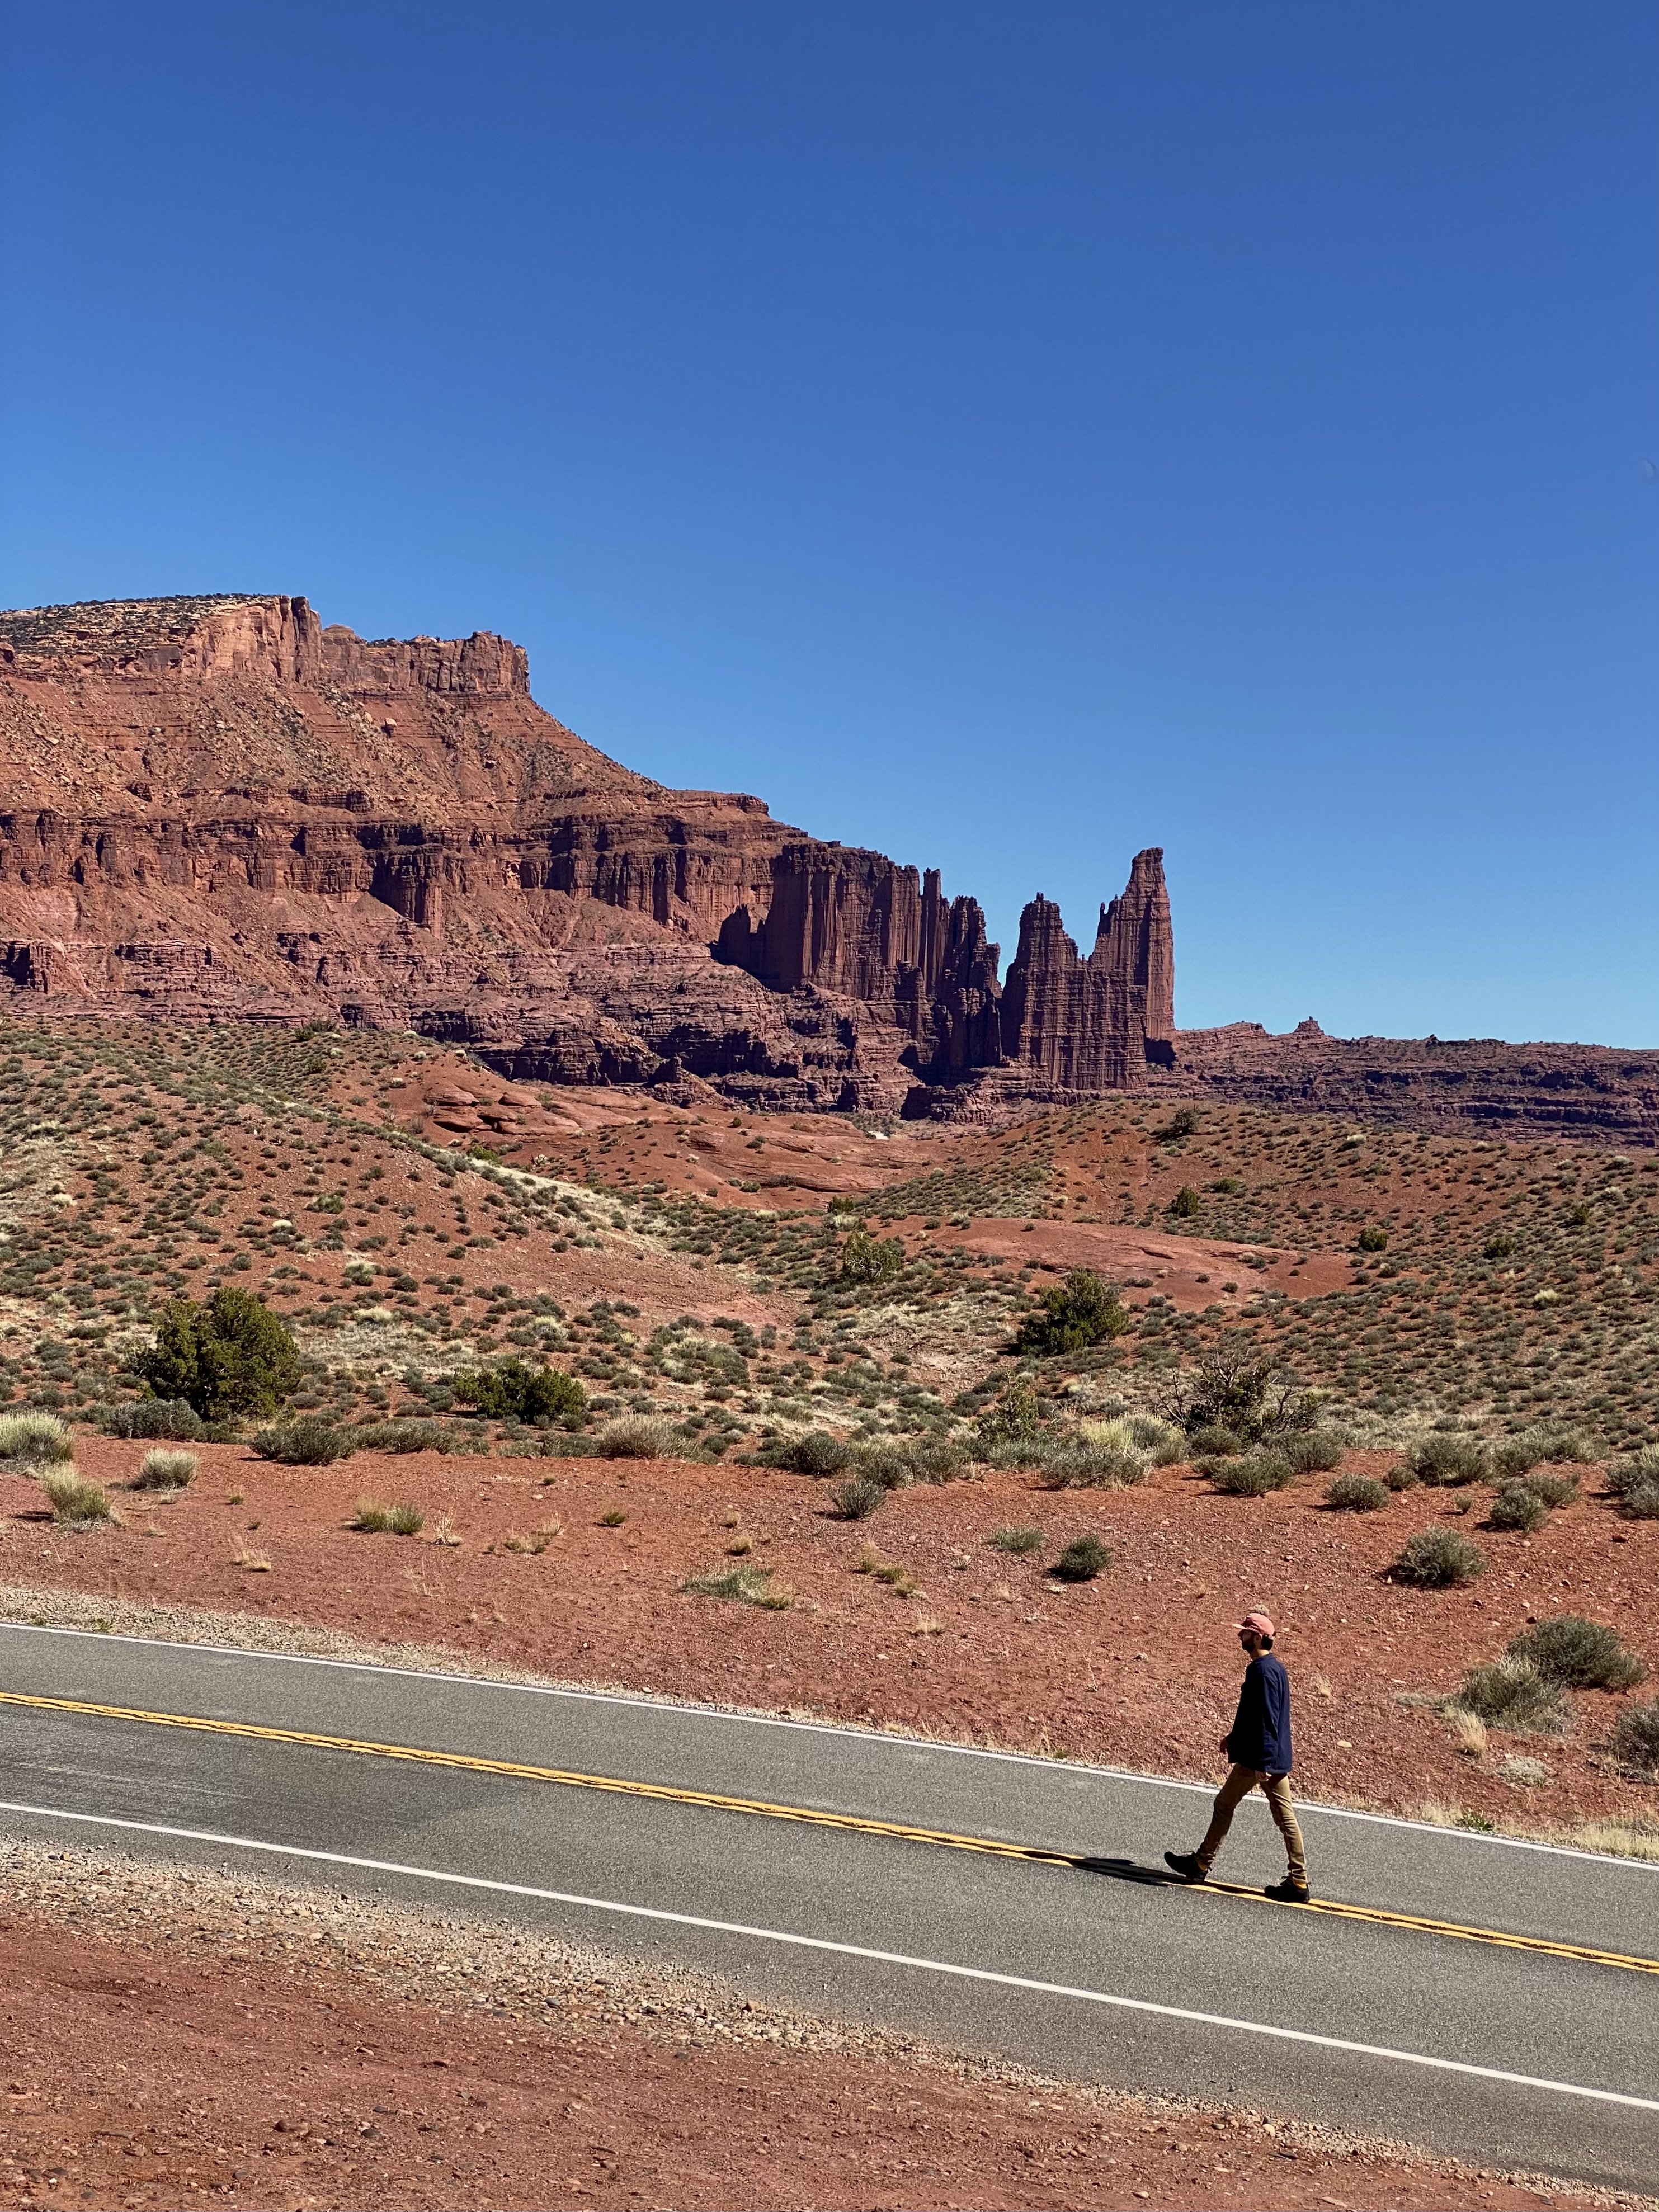 Jonathan in a blue shirt and tan pants walks along the highway with red jagged rock formations in the background and small green plant life. 